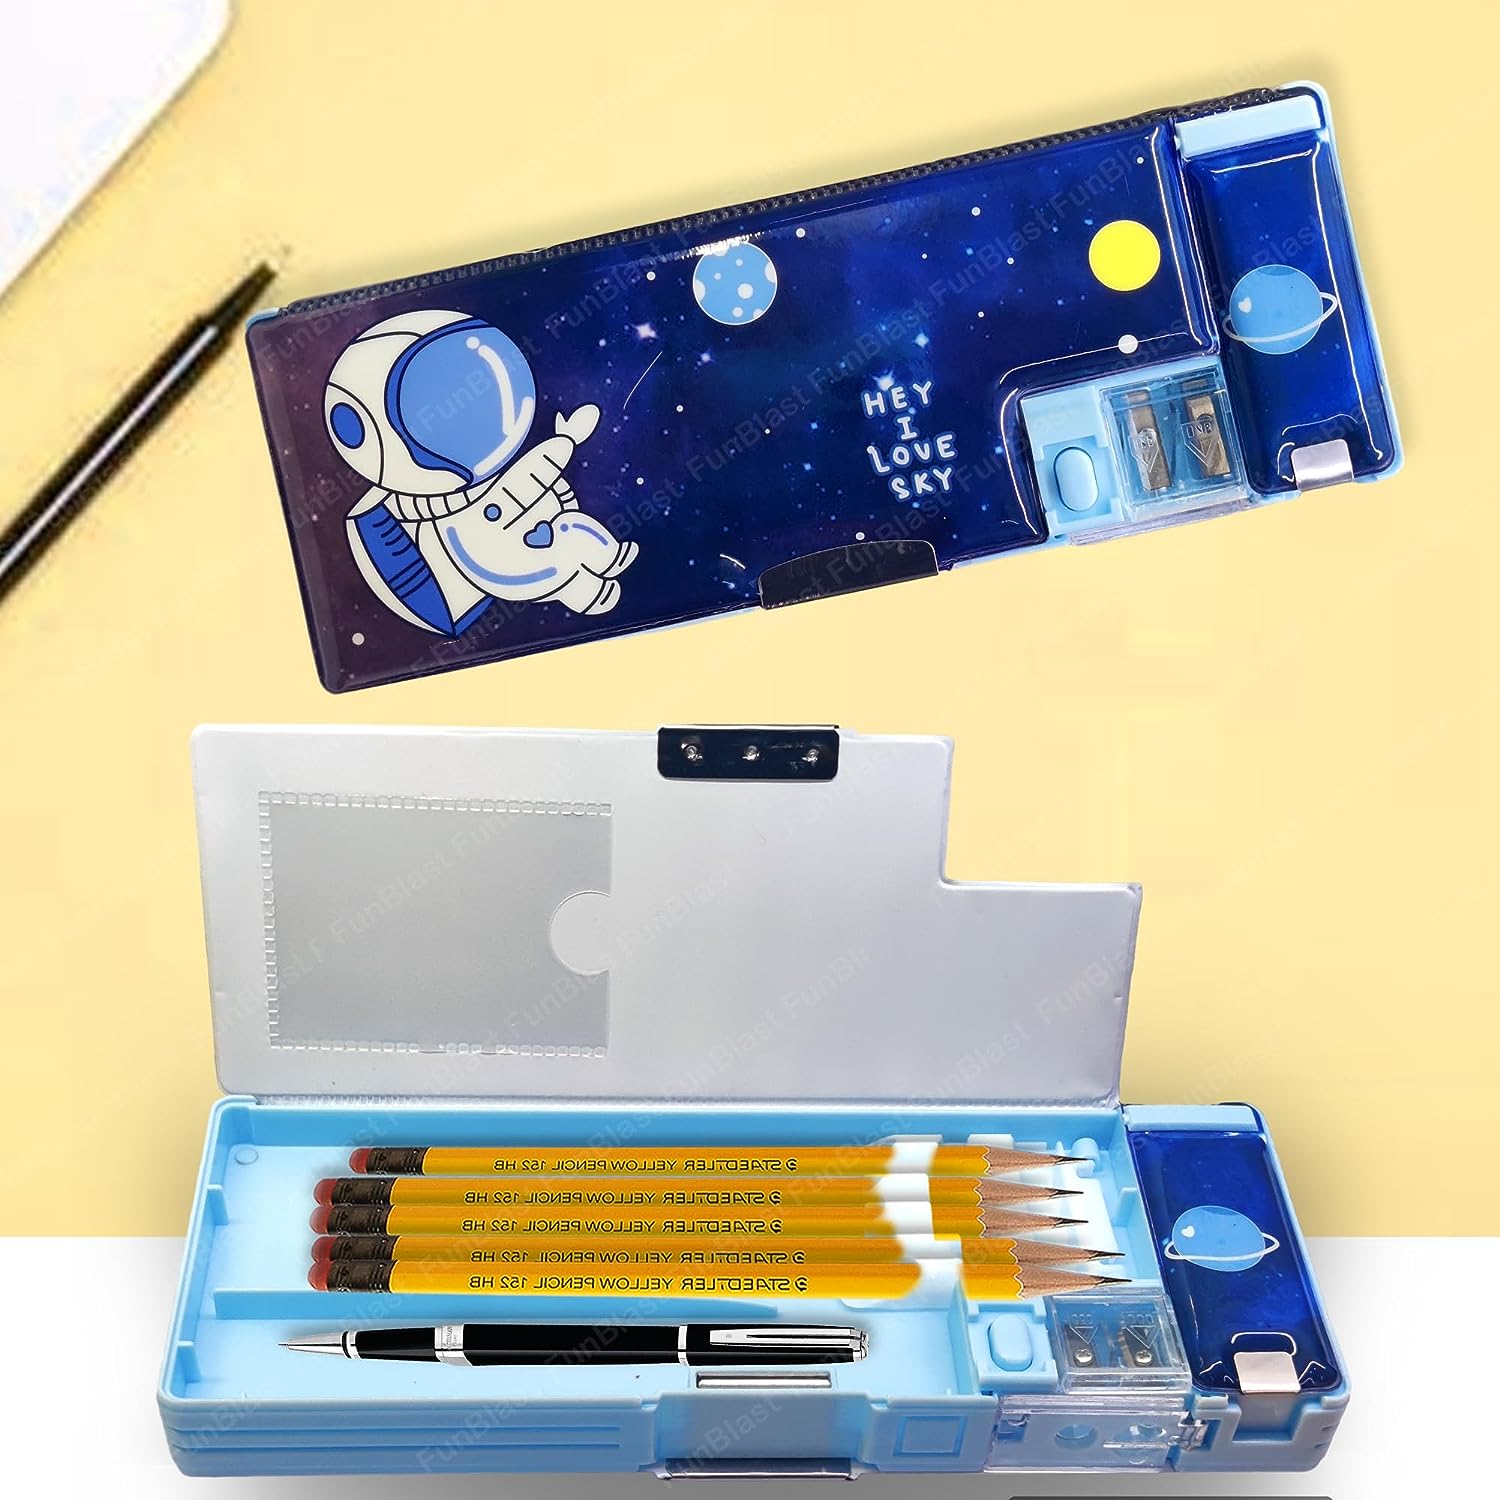 Multifunctional Pencil Box for Kids, Space Pencil Box for Boys, Magnetic  Pencil Box for Boys, Pop up Pencil Box